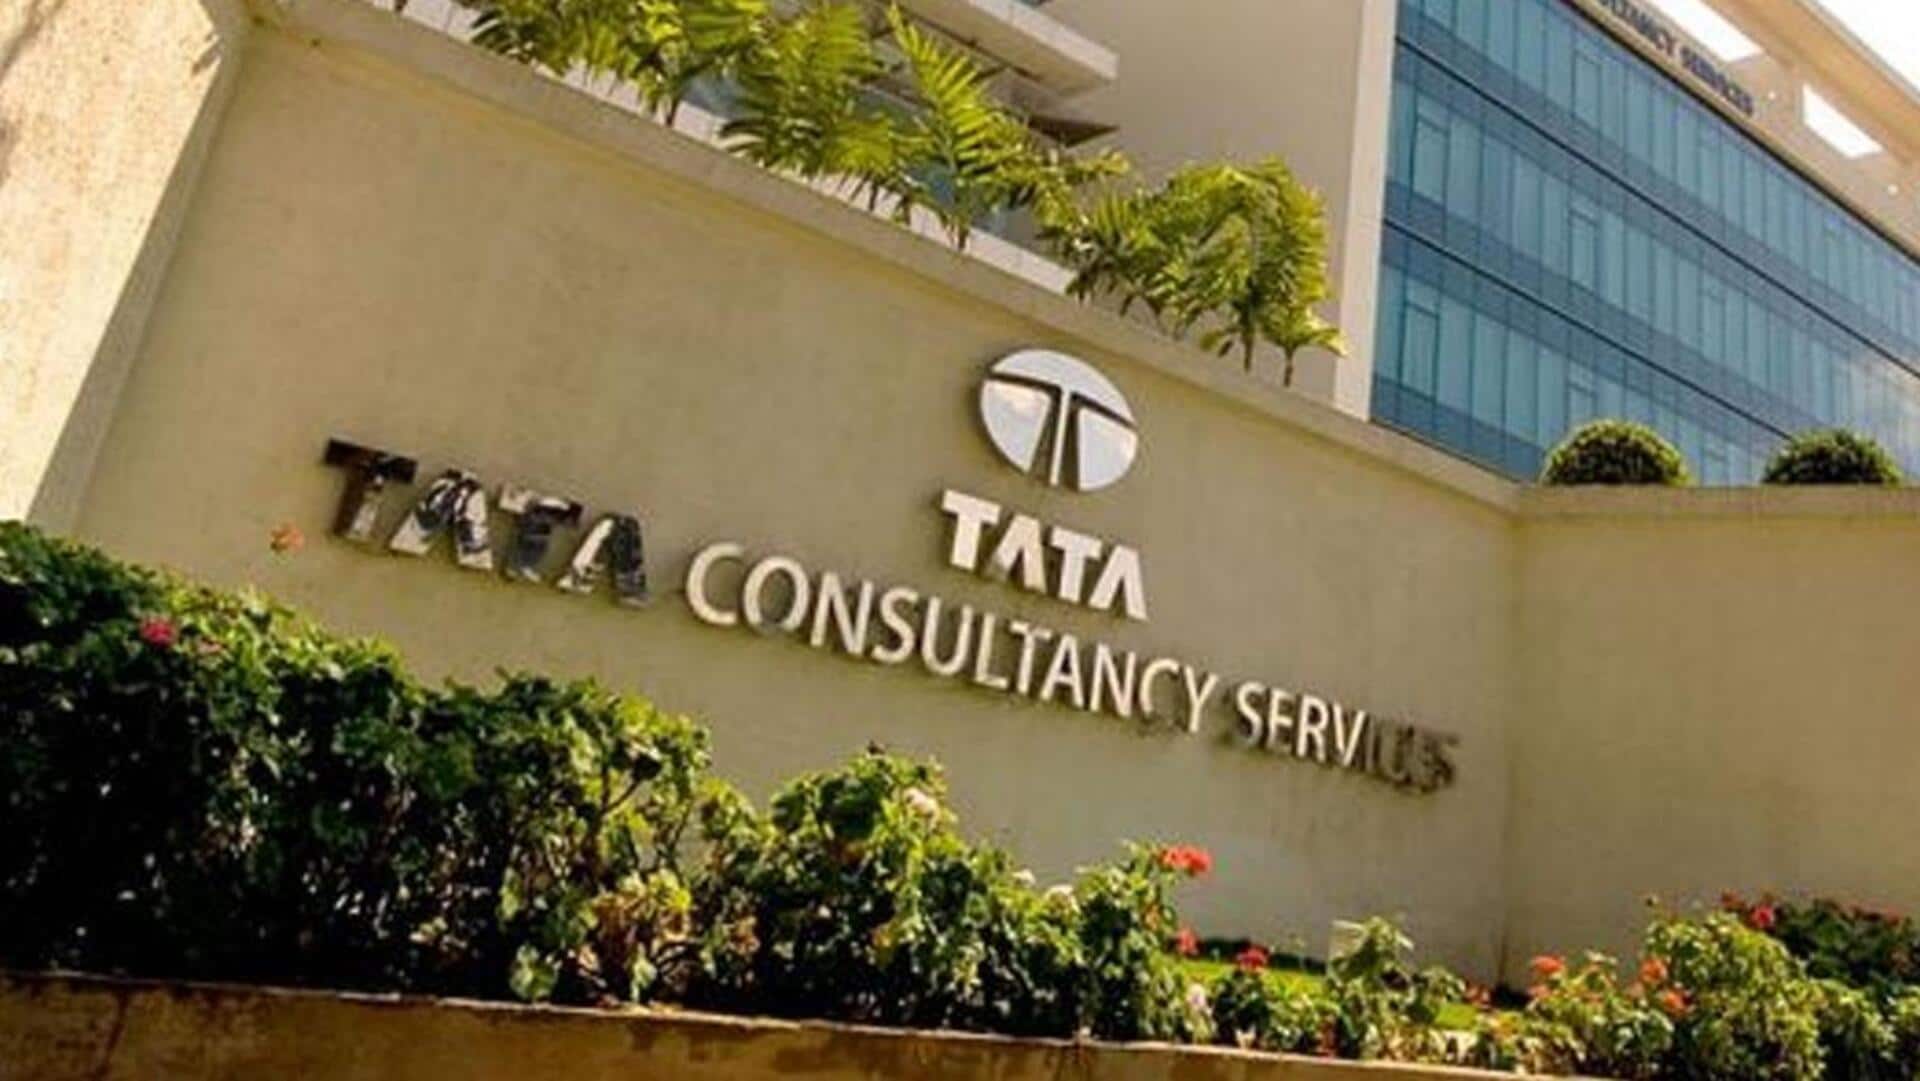 TCS bags Rs. 8,300cr deal from Jaguar Land Rover